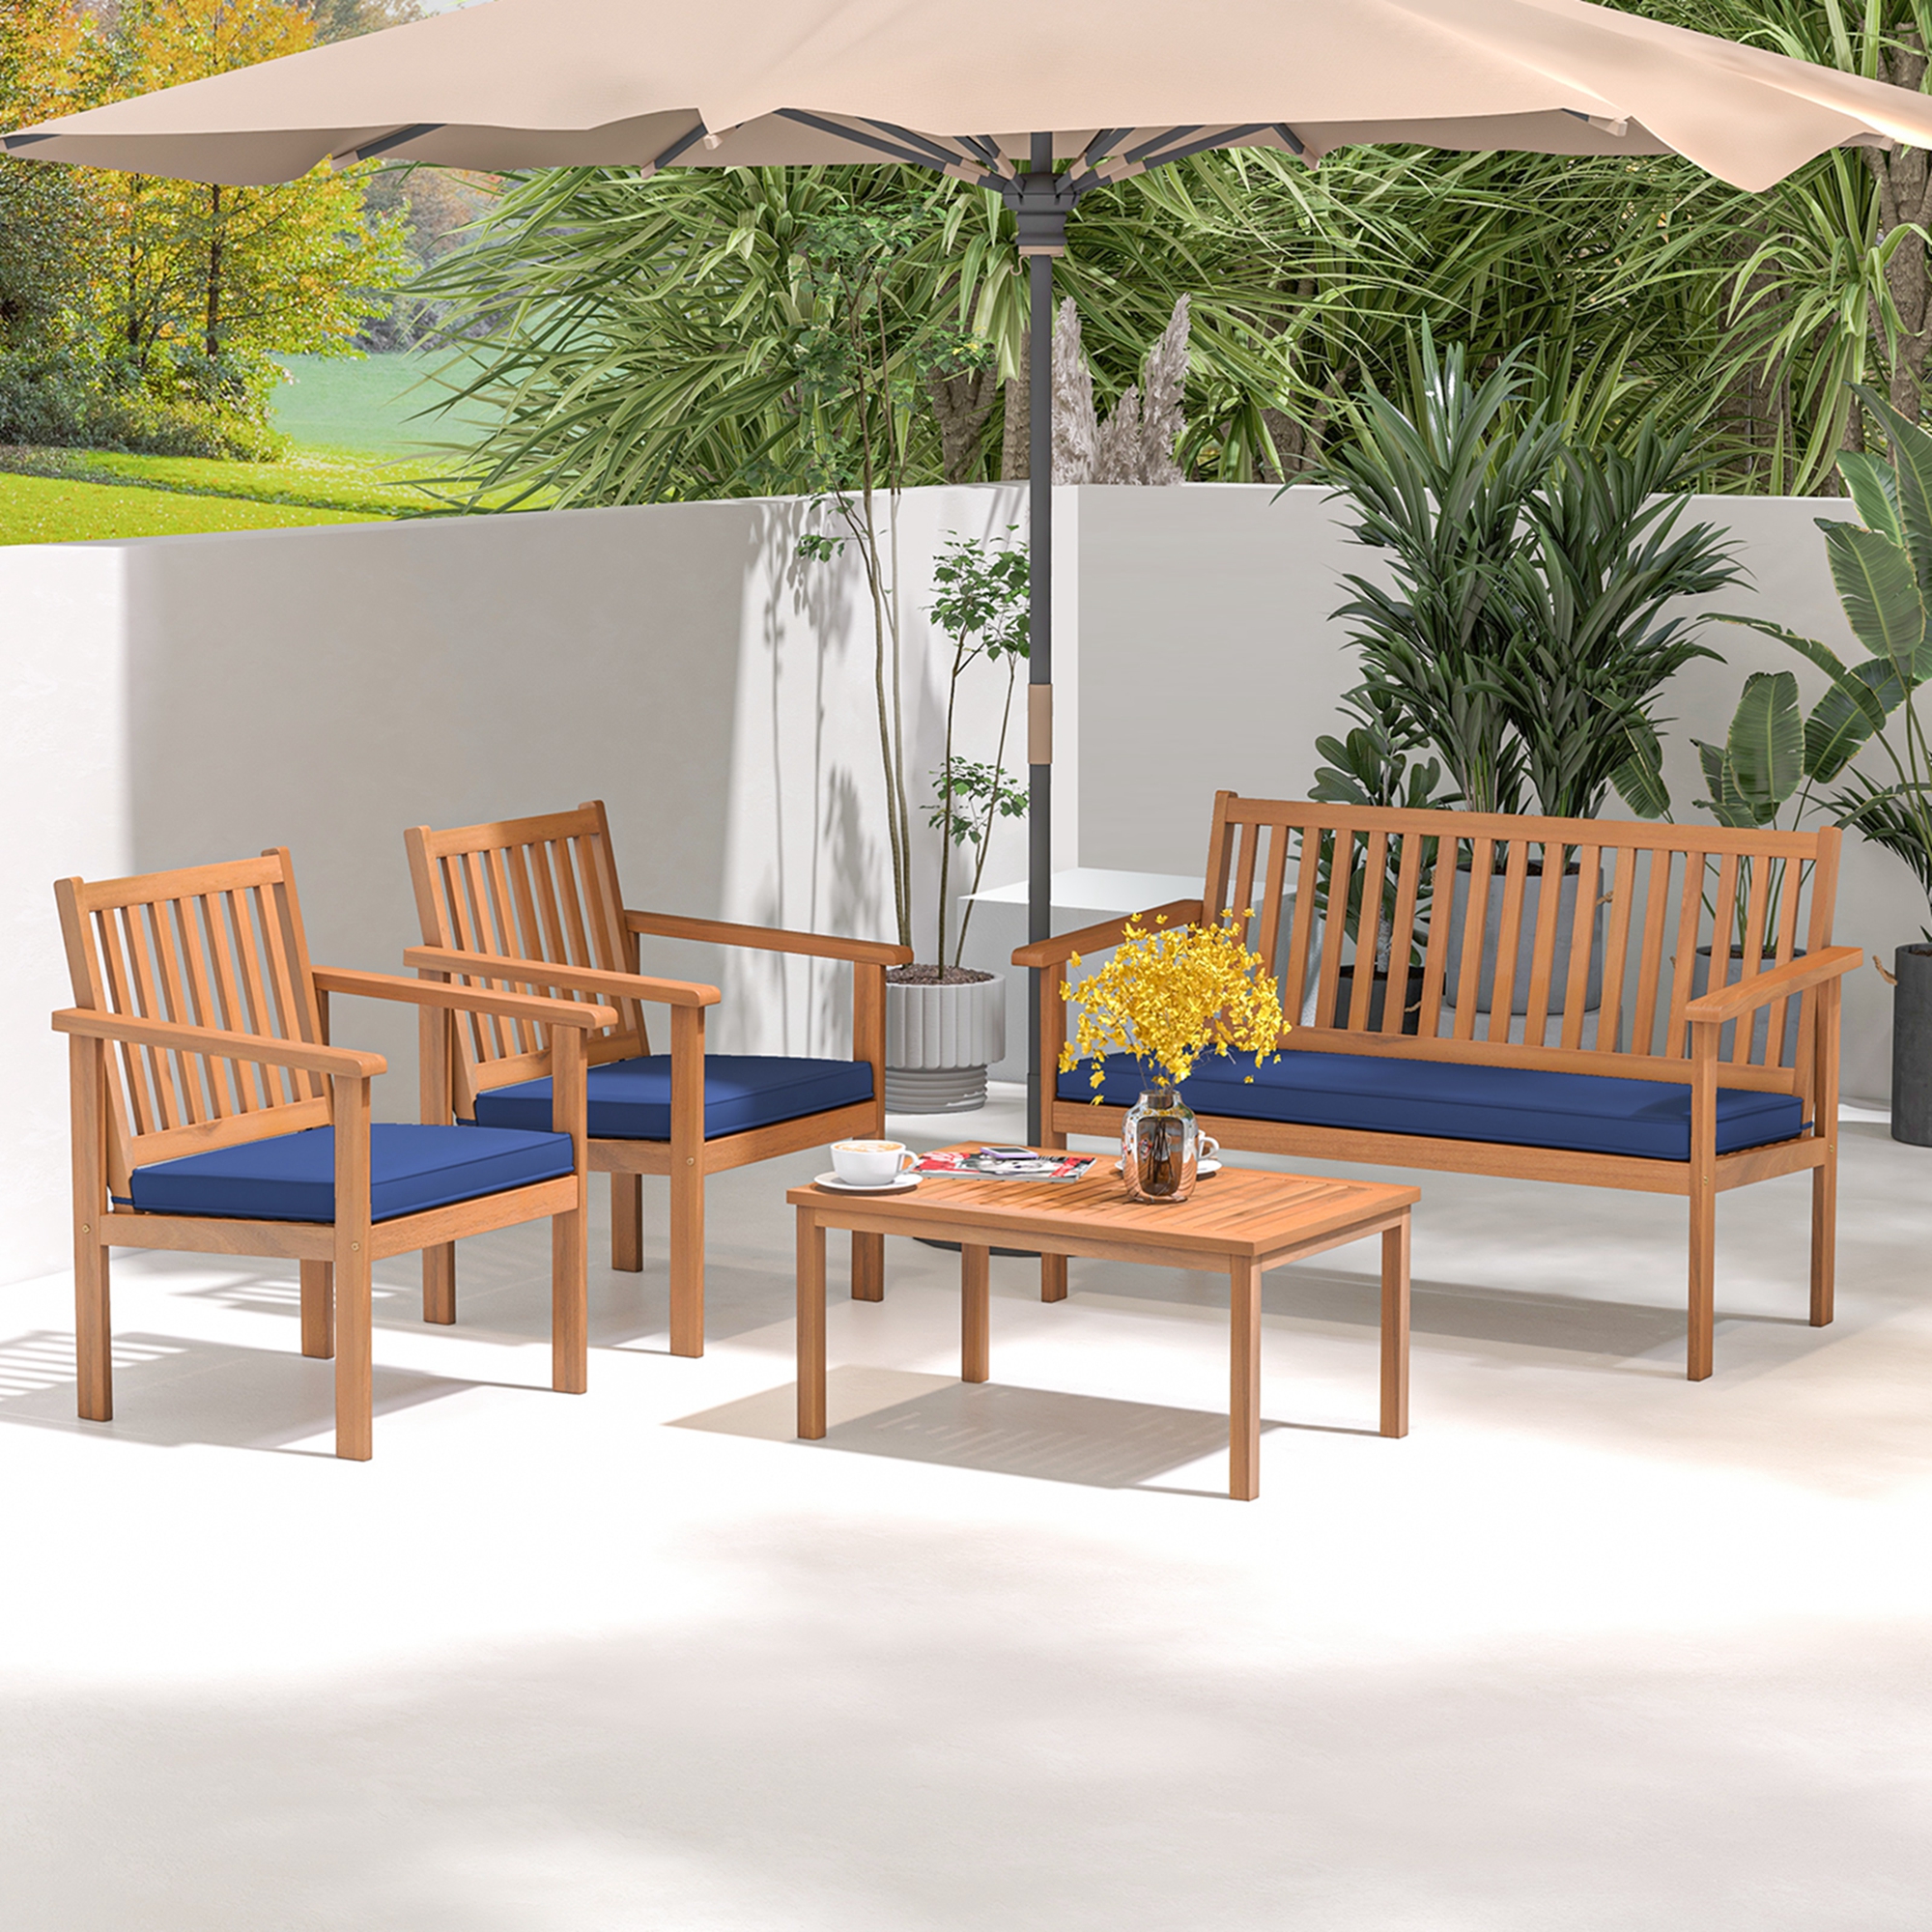 Costway 4 PCS Patio Wood Furniture Set with Loveseat, 2 Chairs & Coffee Table for Porch Navy - image 1 of 10